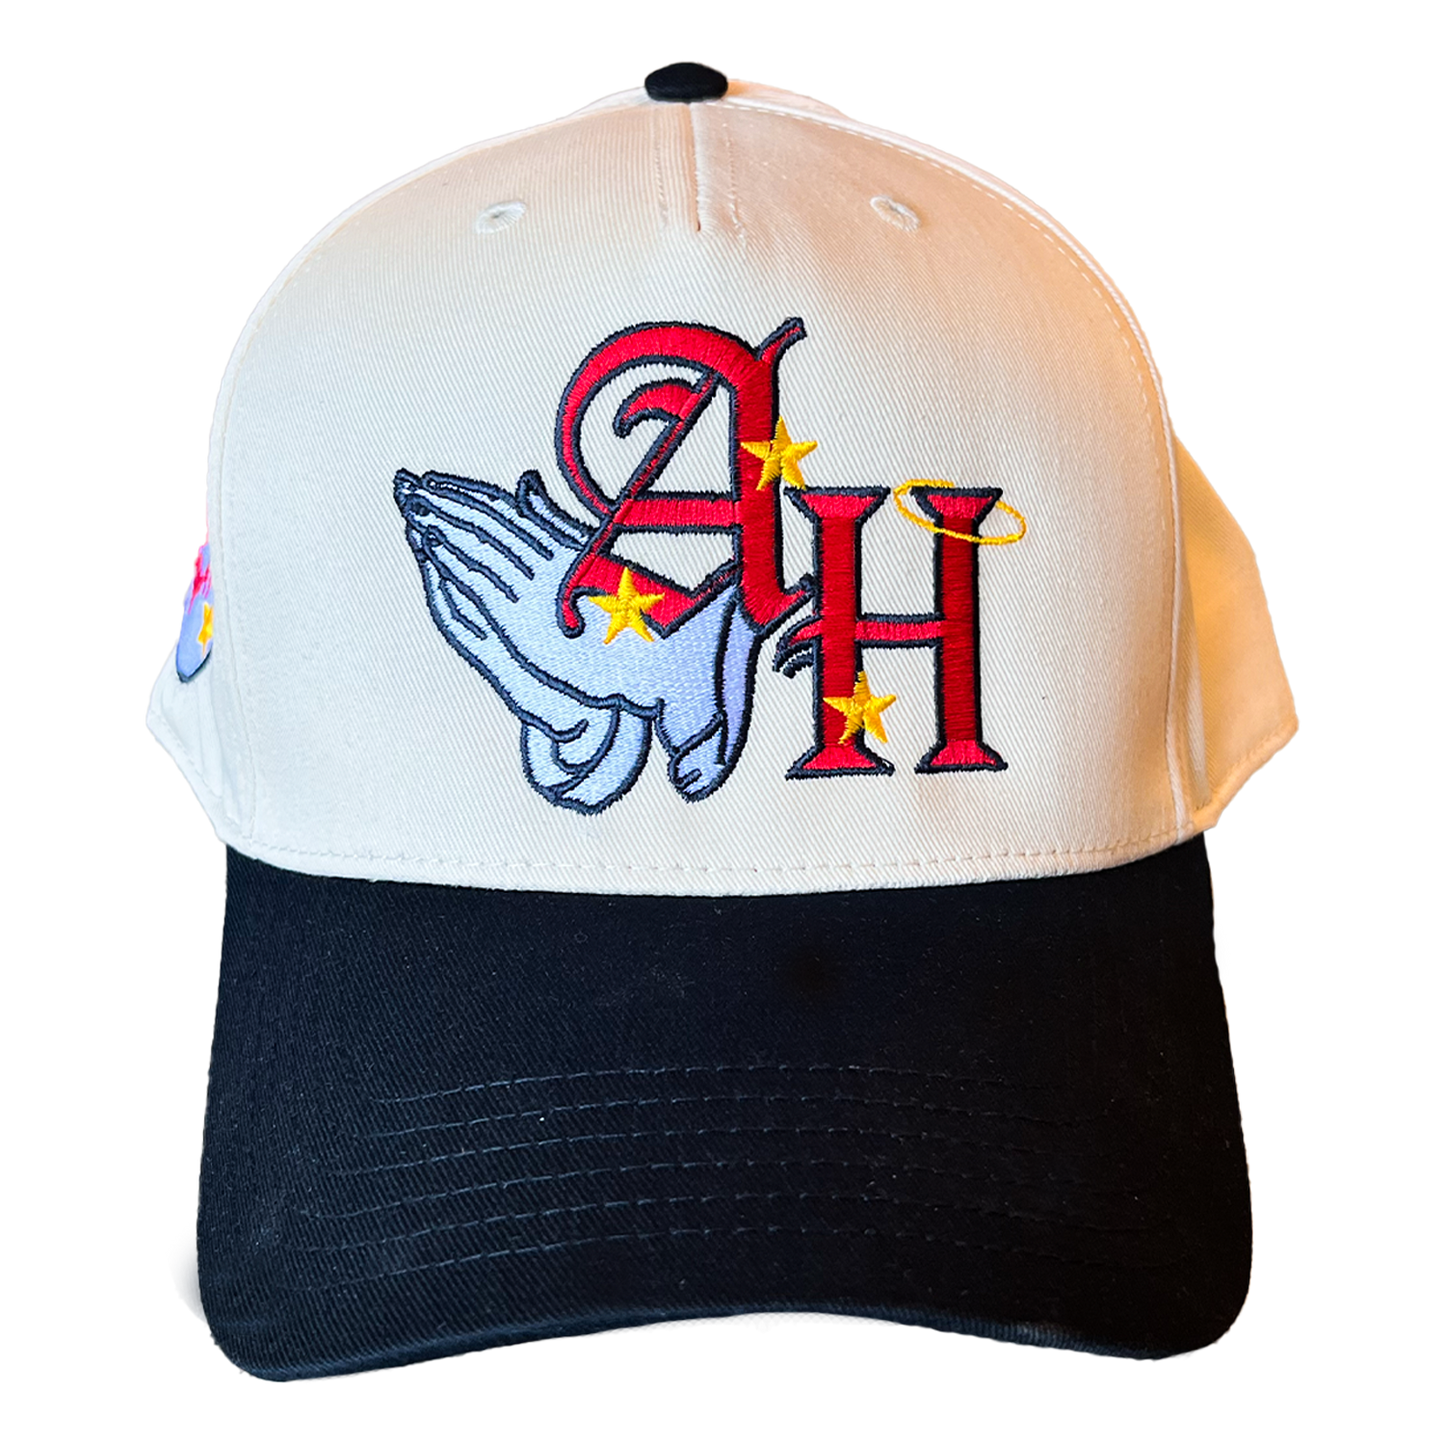 The All Hail SIGNATURE Hat